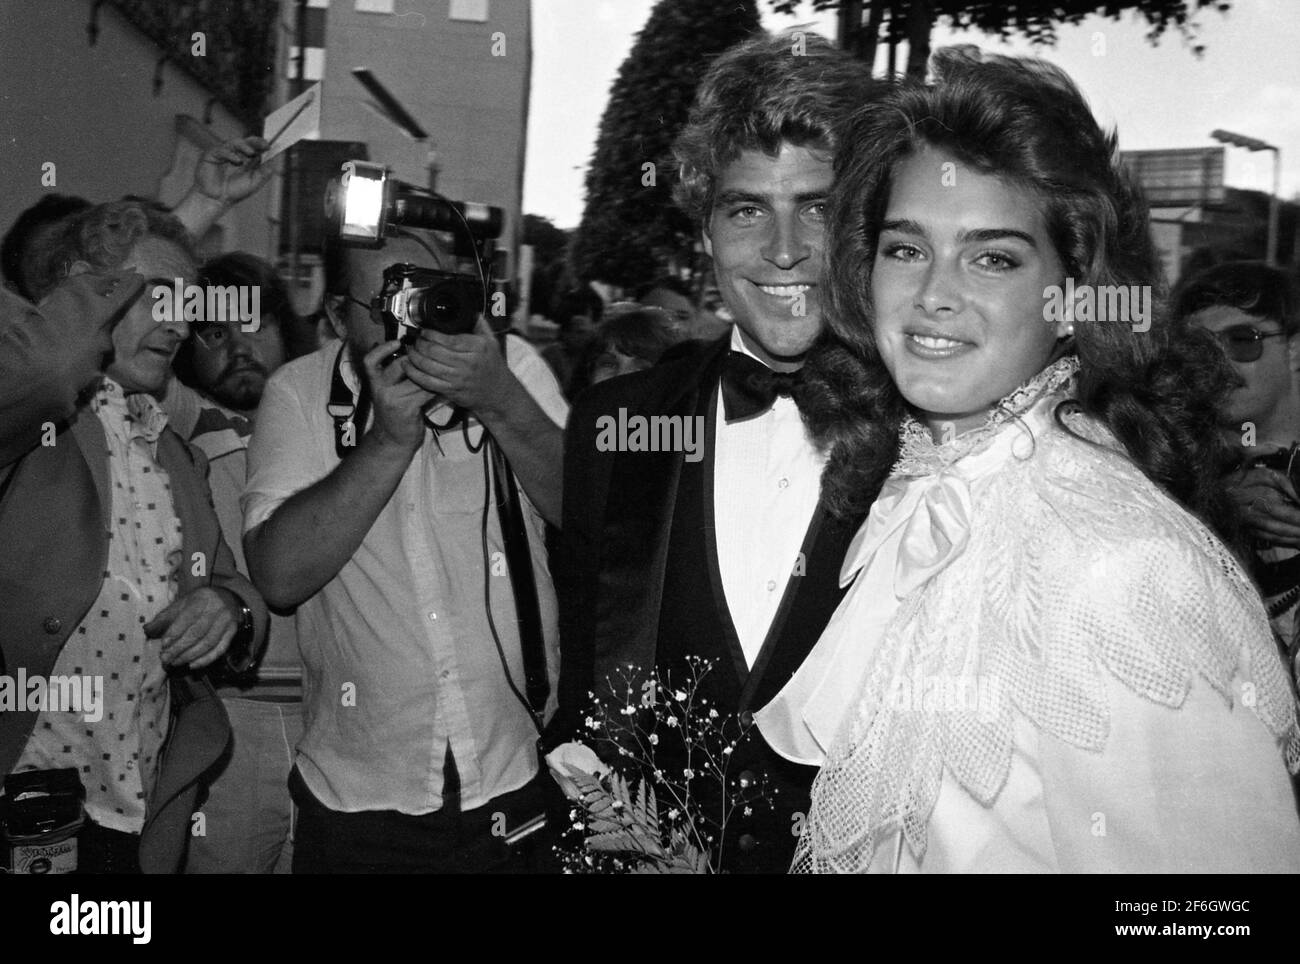 Ted McGinley and Brooke Shields December 20, 1979. Credit Ralph